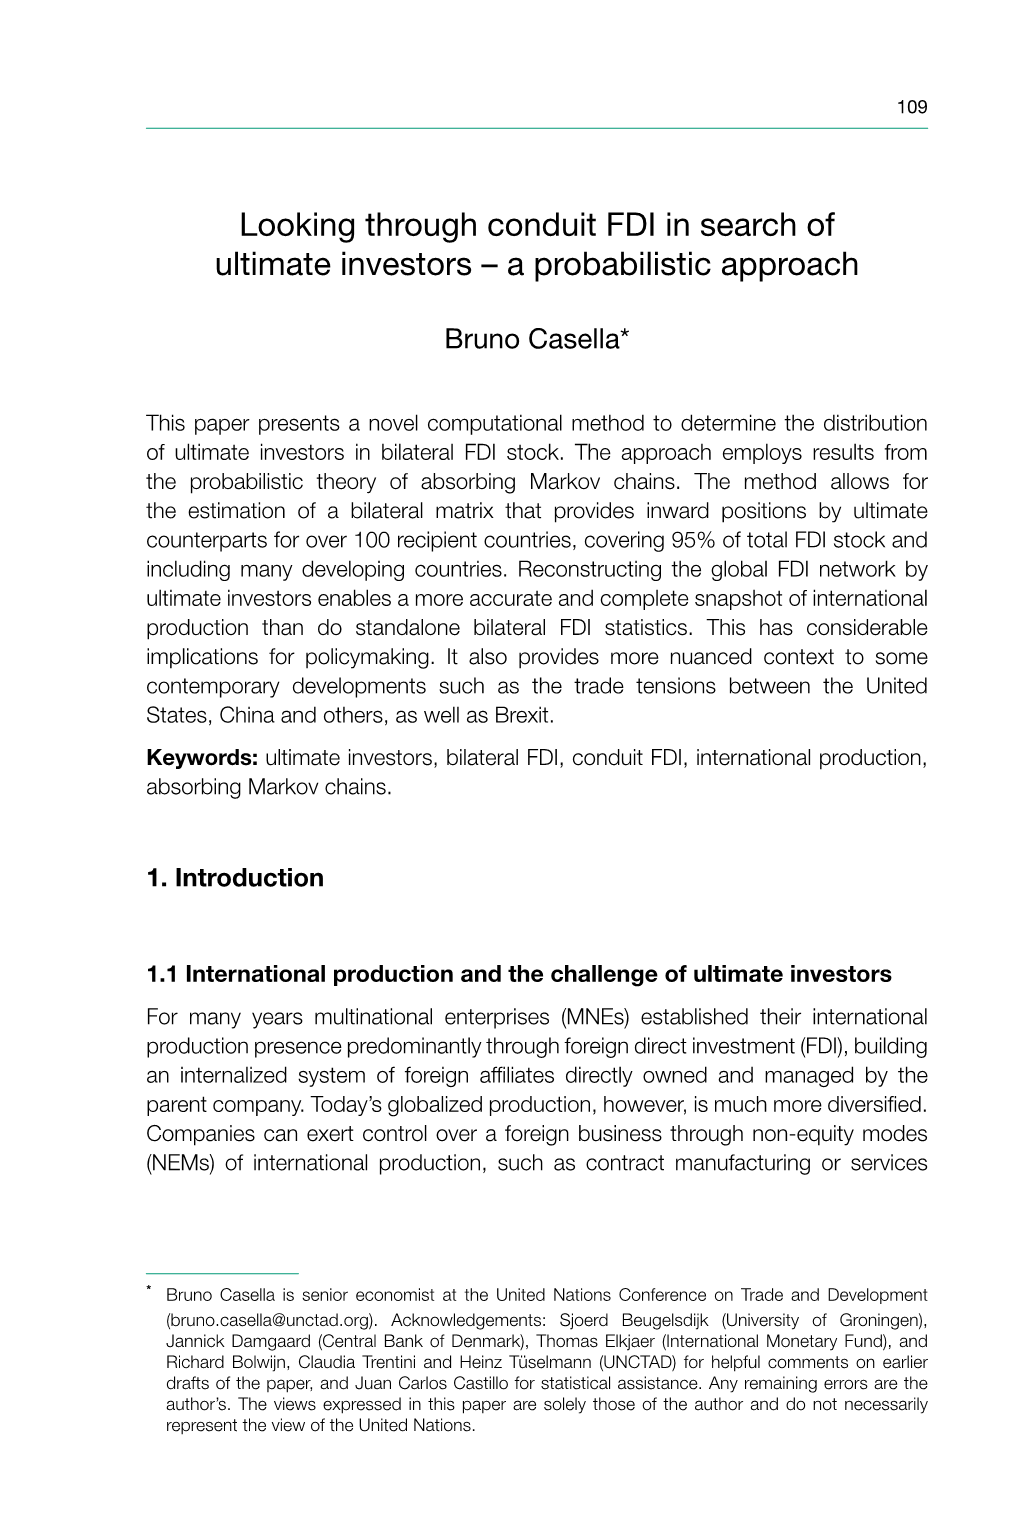 Looking Through Conduit FDI in Search of Ultimate Investors – a Probabilistic Approach